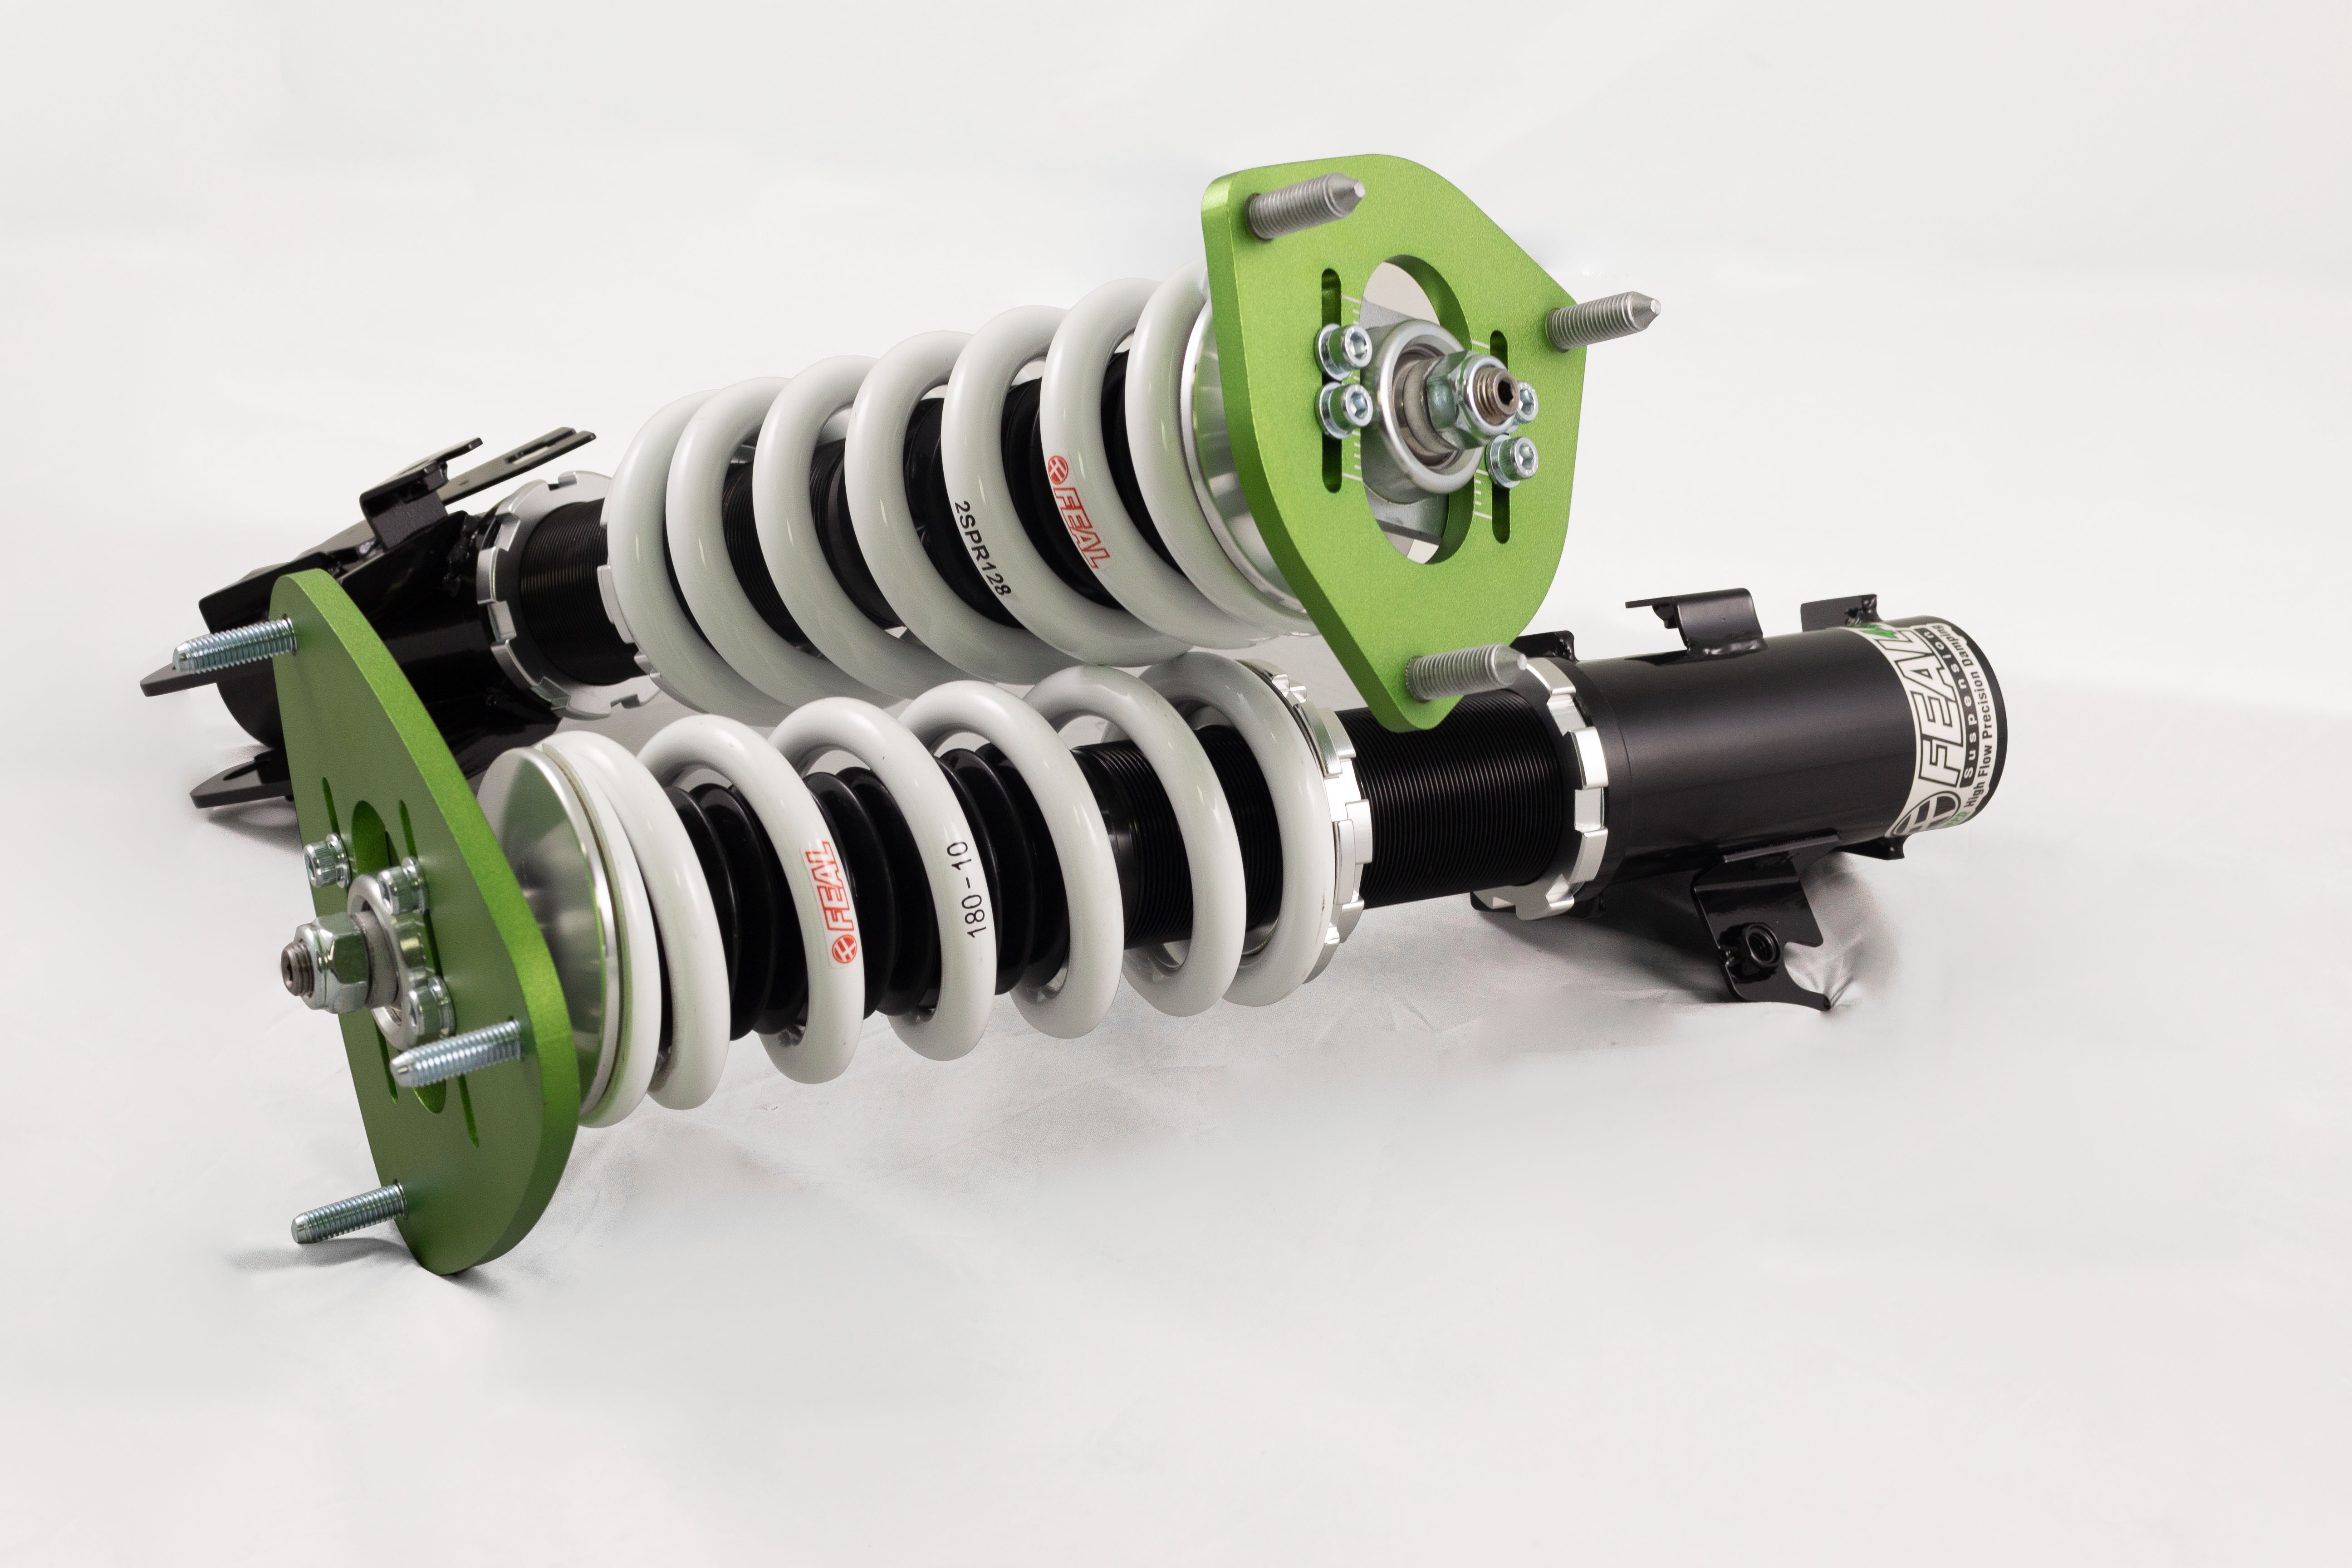 Coilovers - High Quality Suspension for Use Both On and Off the Track